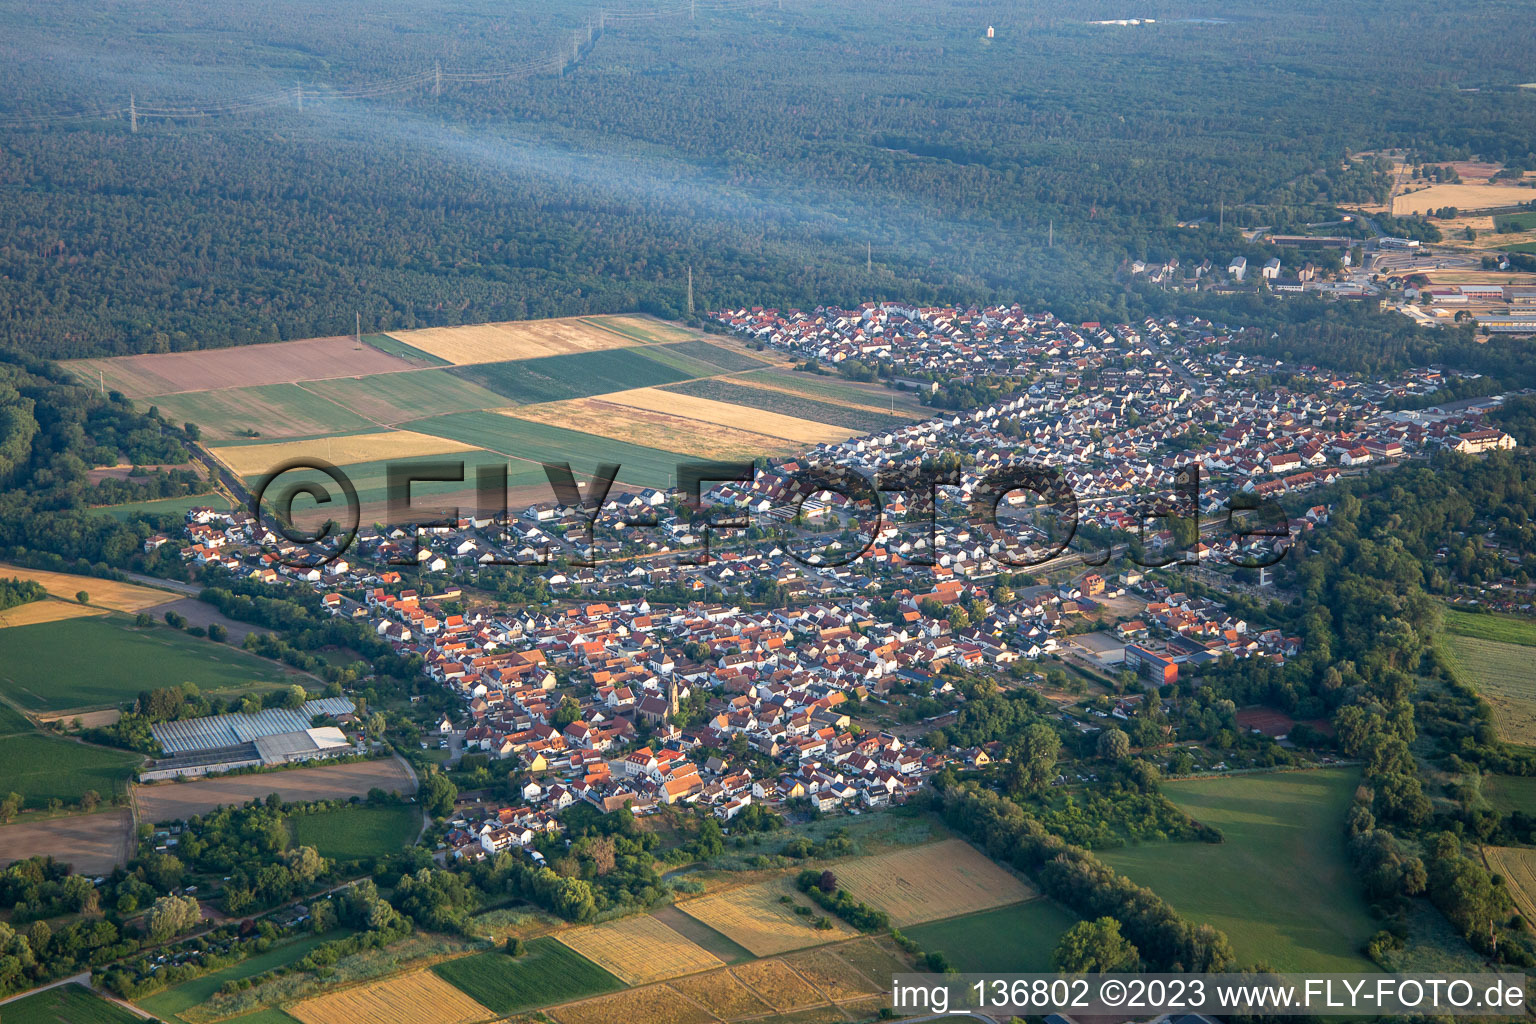 From the southeast in the district Sondernheim in Germersheim in the state Rhineland-Palatinate, Germany